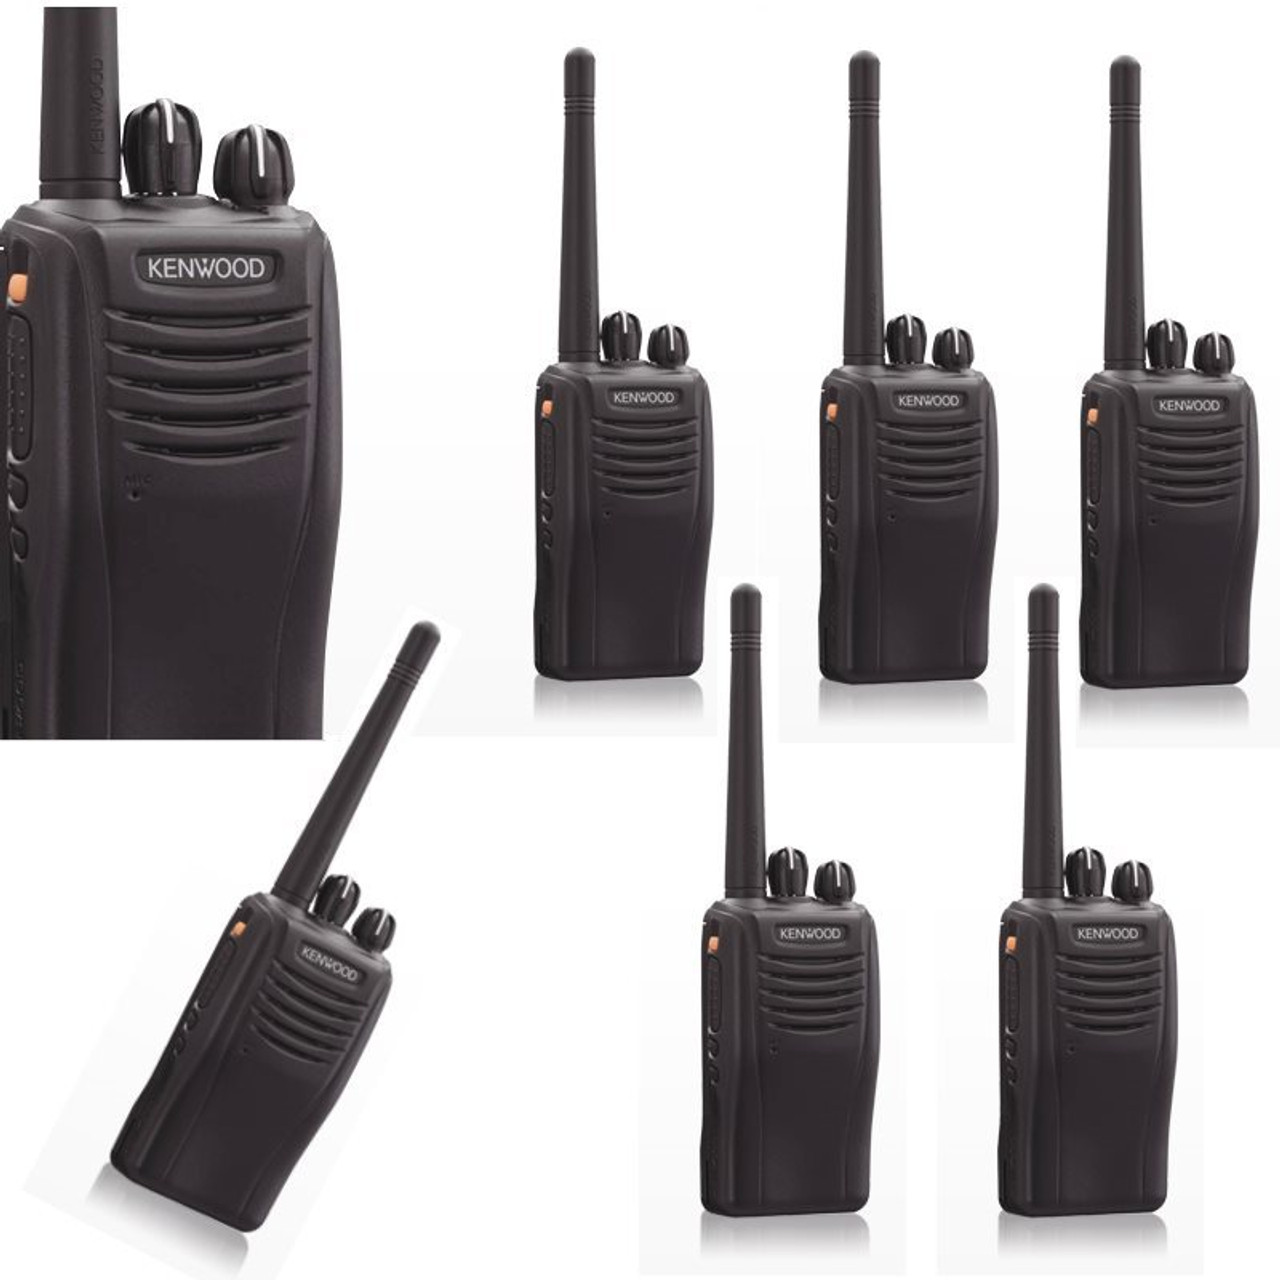 This Six Pack of the Intrinsically Safe TK2360ISV16P outdoor VHF radio is a great buy. It has 16 channel VHF two way radio designed for hazardous job sites. Ideal for